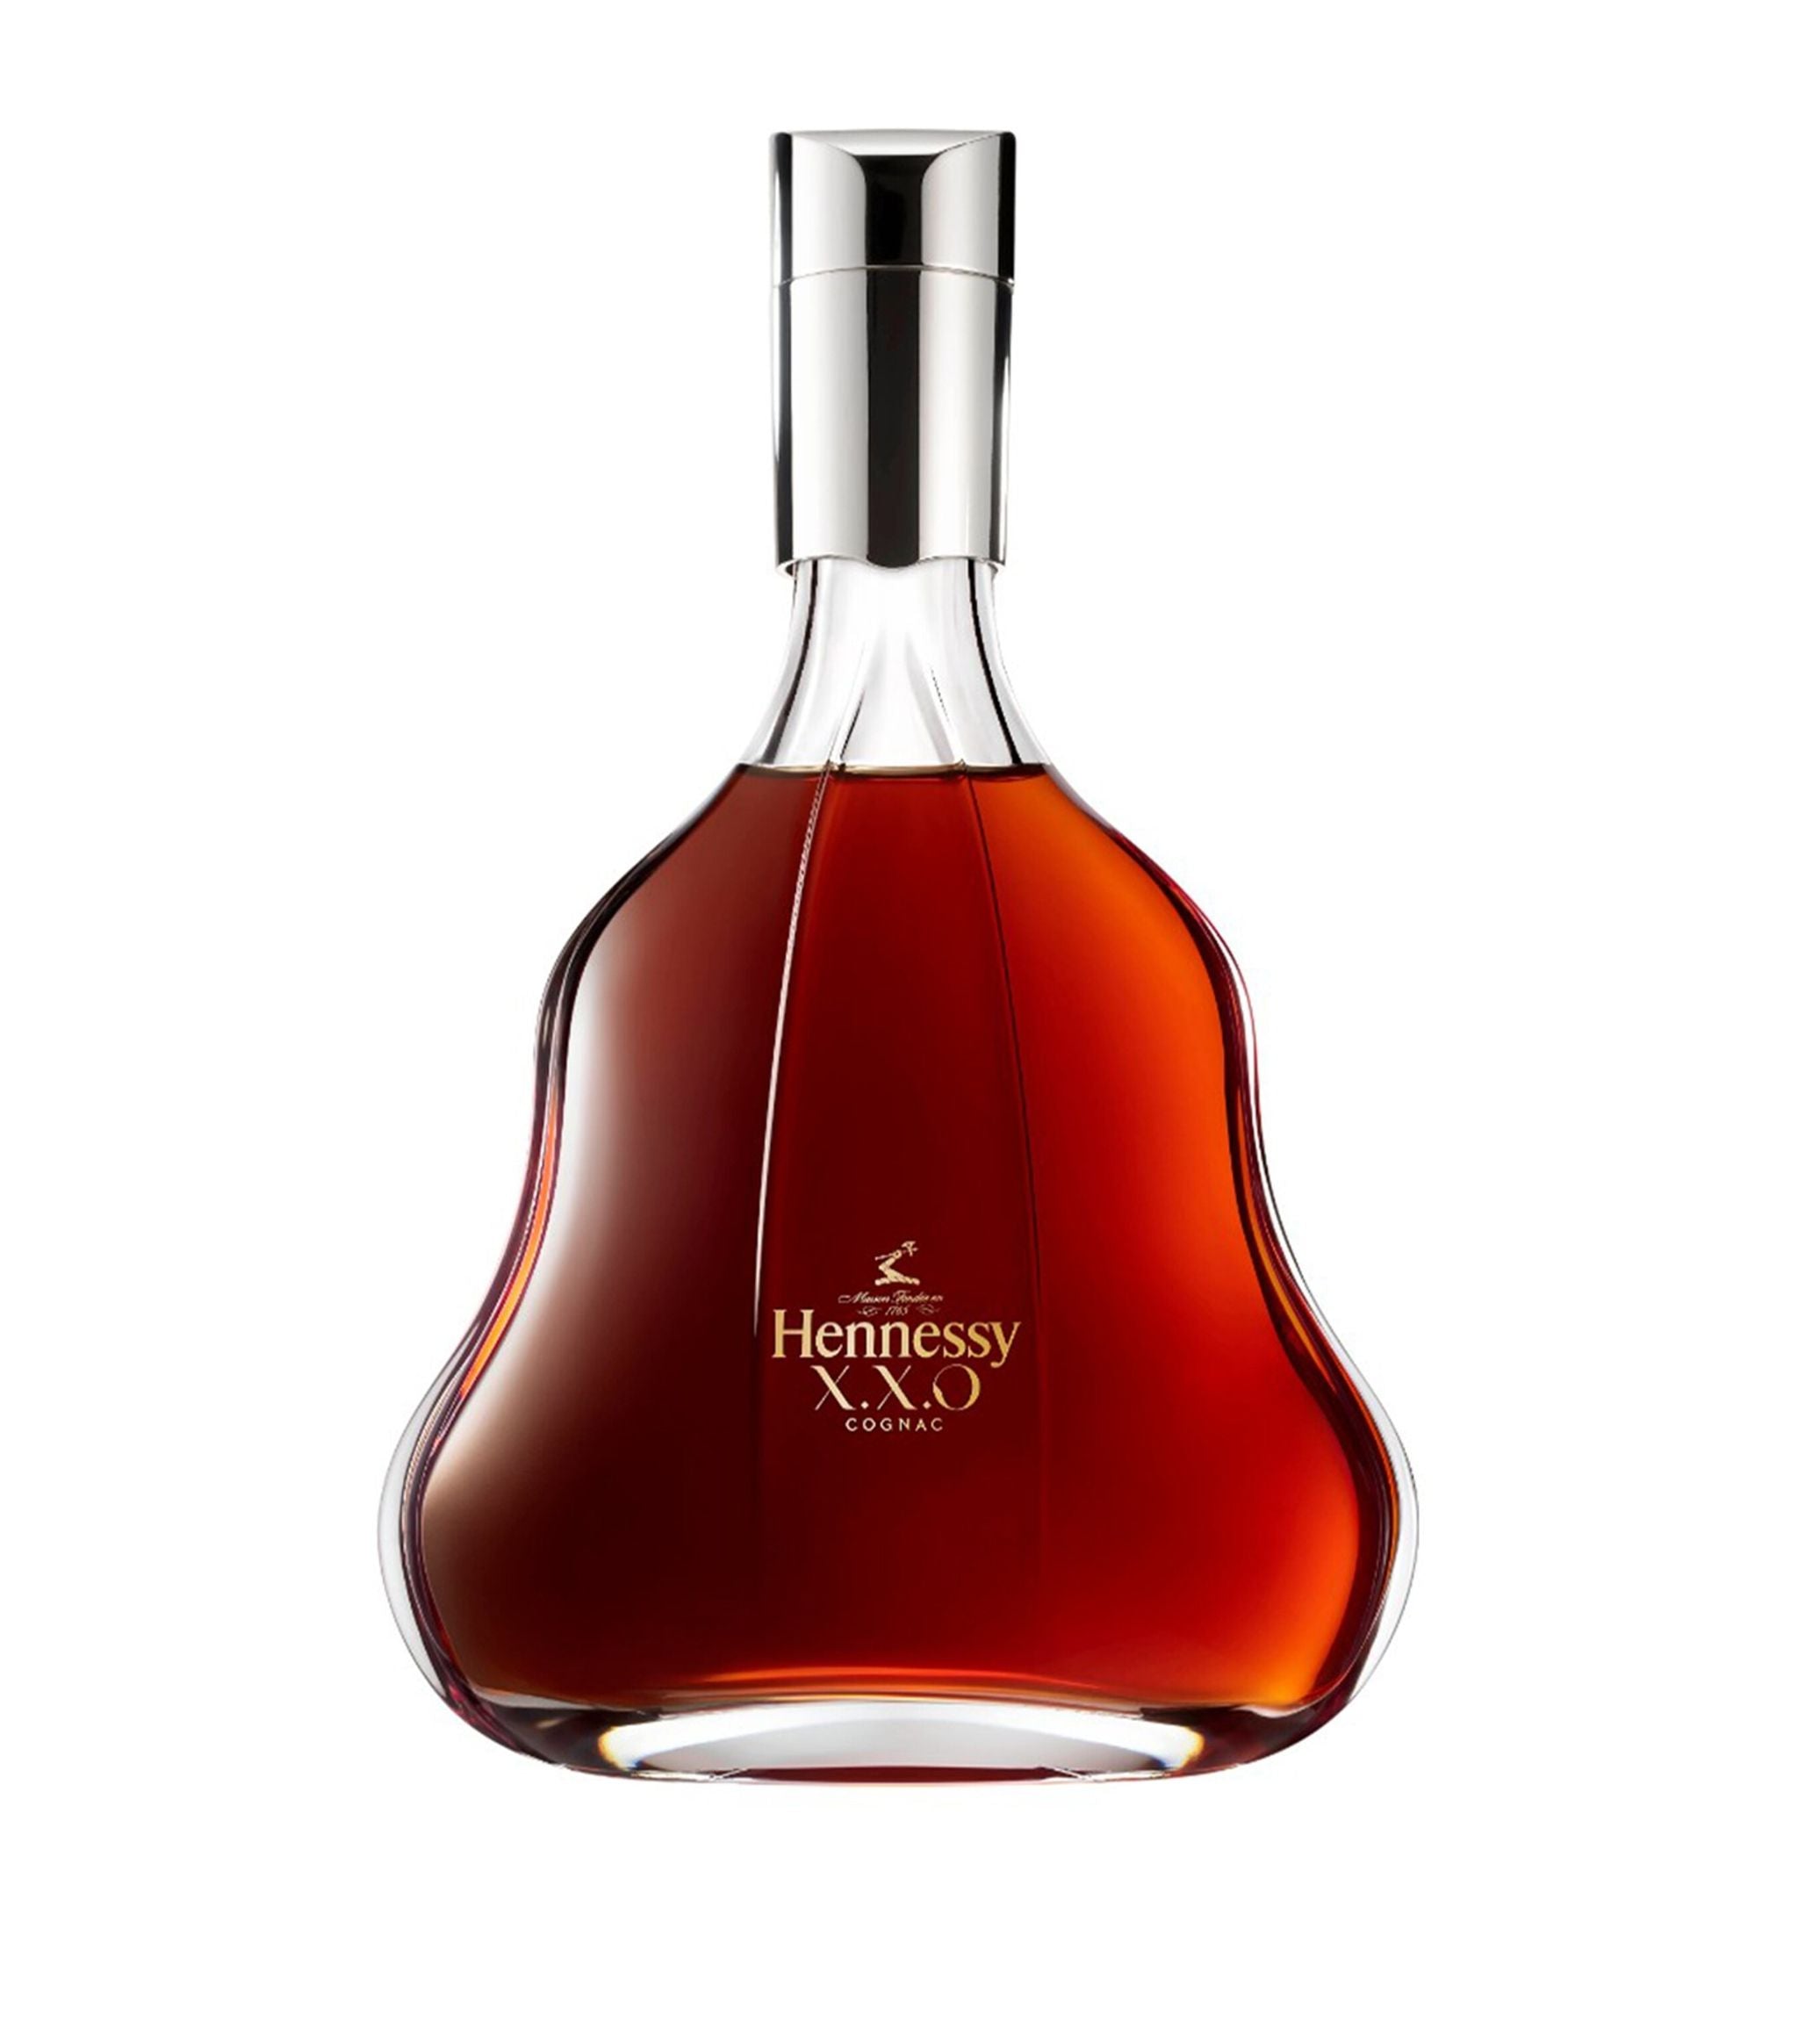 Hennessy VS Cognac Review in Hindi